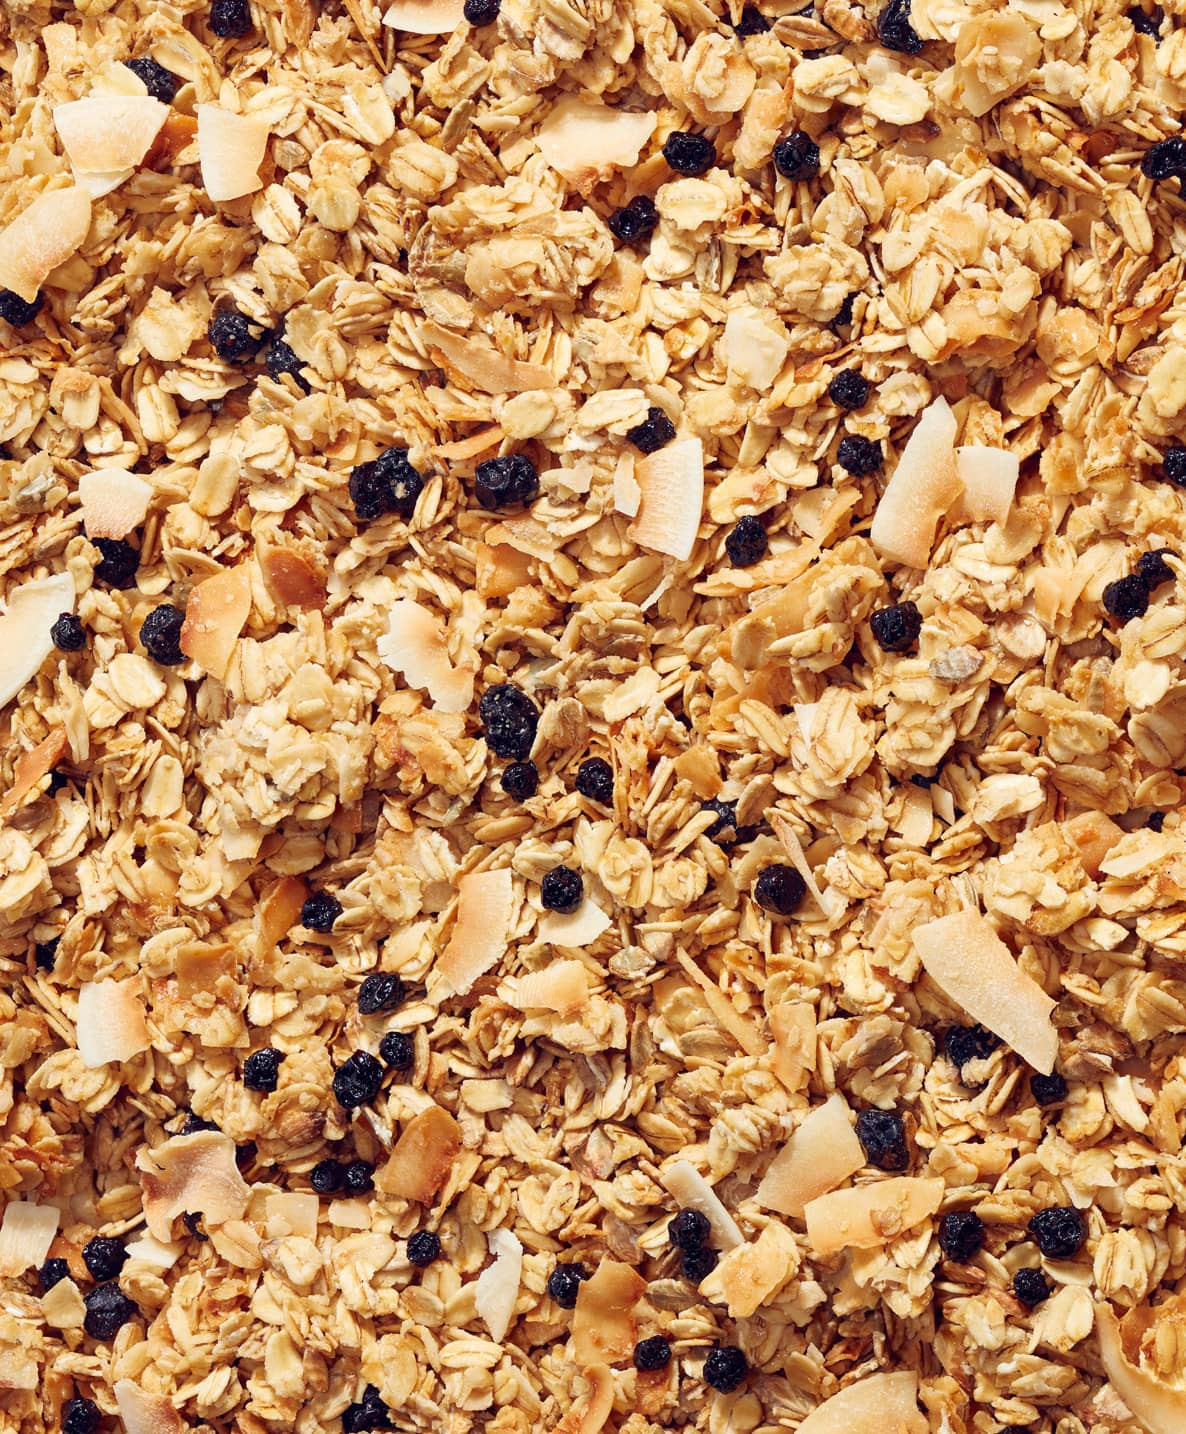 Coconut and Blueberry Granola (300g)